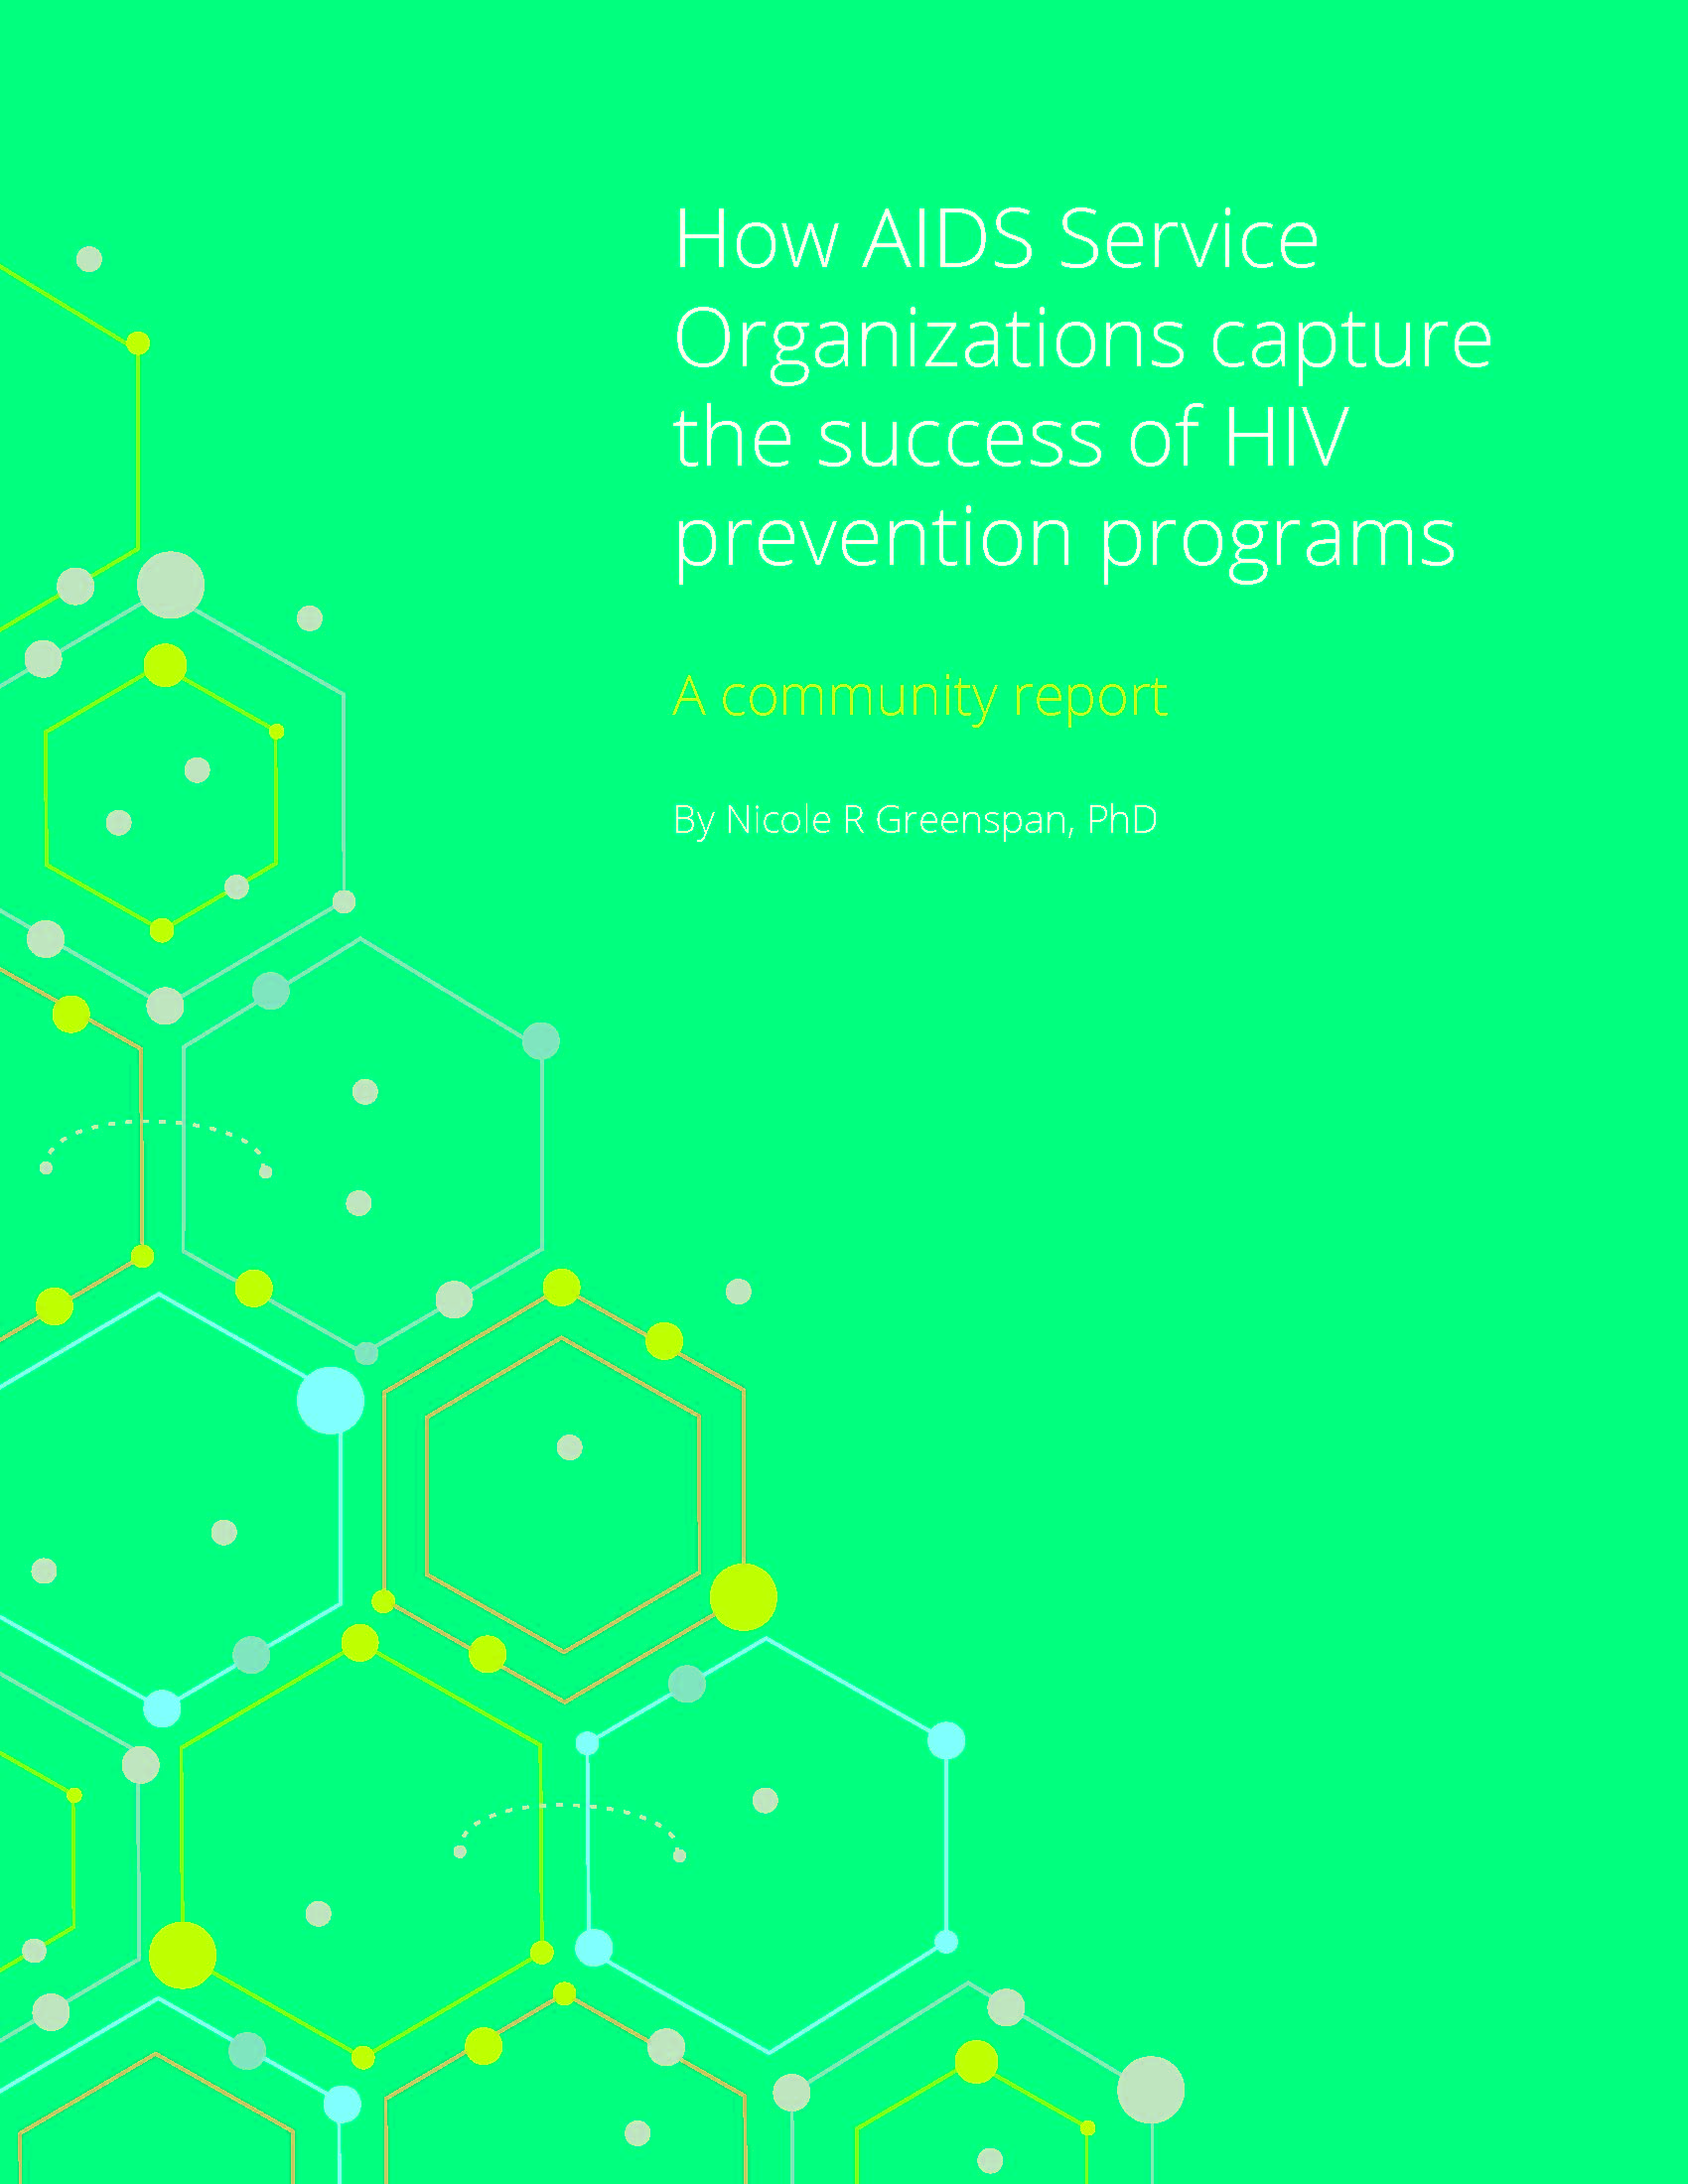 How AIDS Service Organizations capture the success of HIV prevention programs: A Community Report